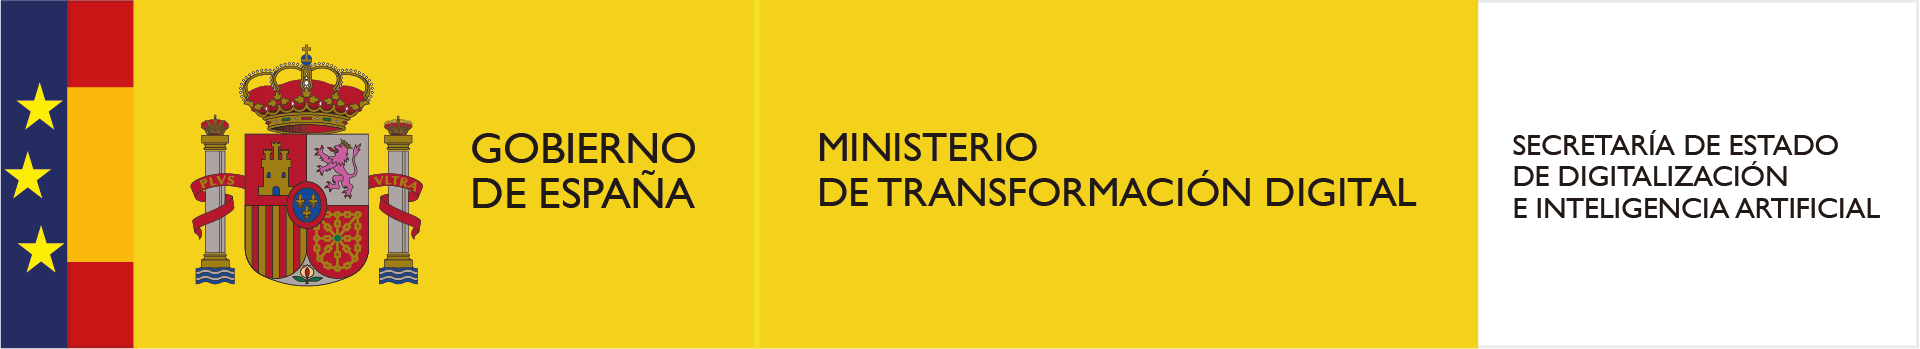 Spain Government. First VicePresidency of the Government. Ministry of Economic Affairs and Digital Transformation. Secretary of State for Digitization and Artificial Intelligence